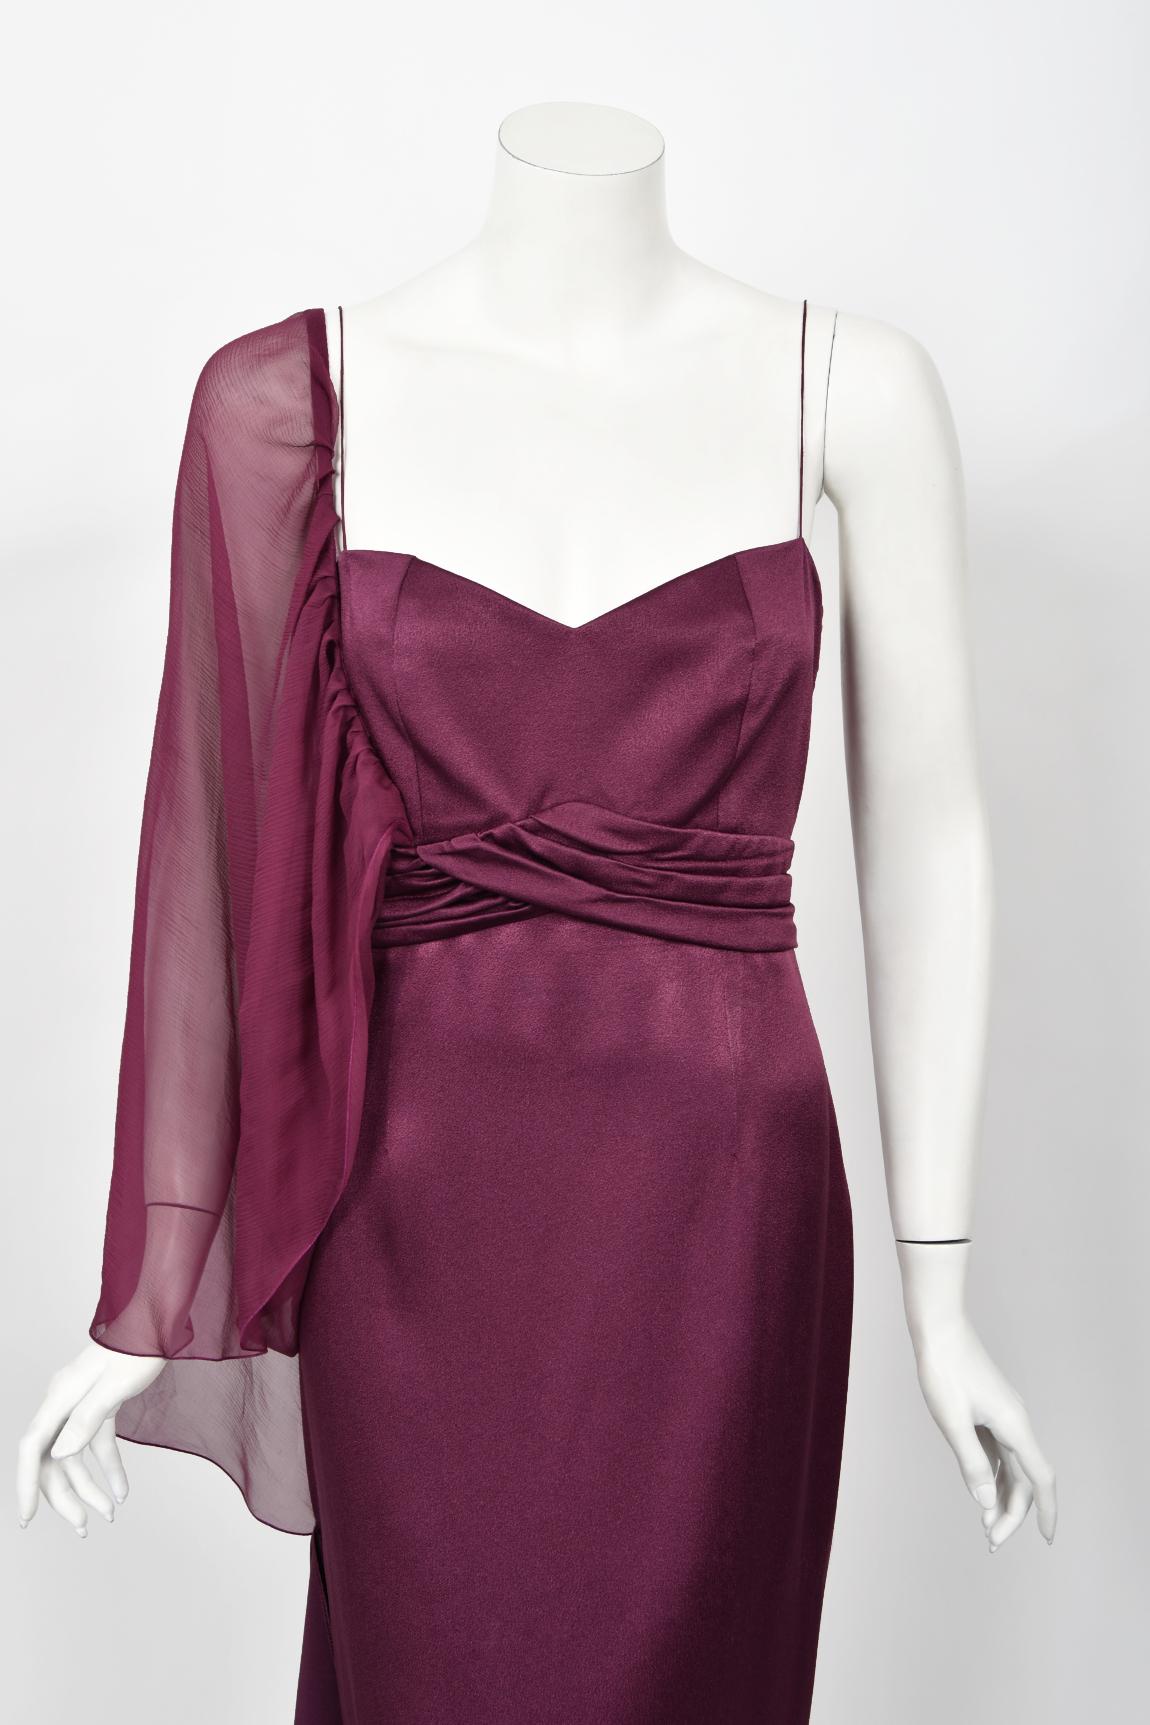 An incredibly chic and ultra rare Christian Dior plum purple silk asymmetric draped gown from John Galliano's highly acclaimed 2000 spring-summer collection. John Galliano is widely considered one of the most innovative and influential fashion